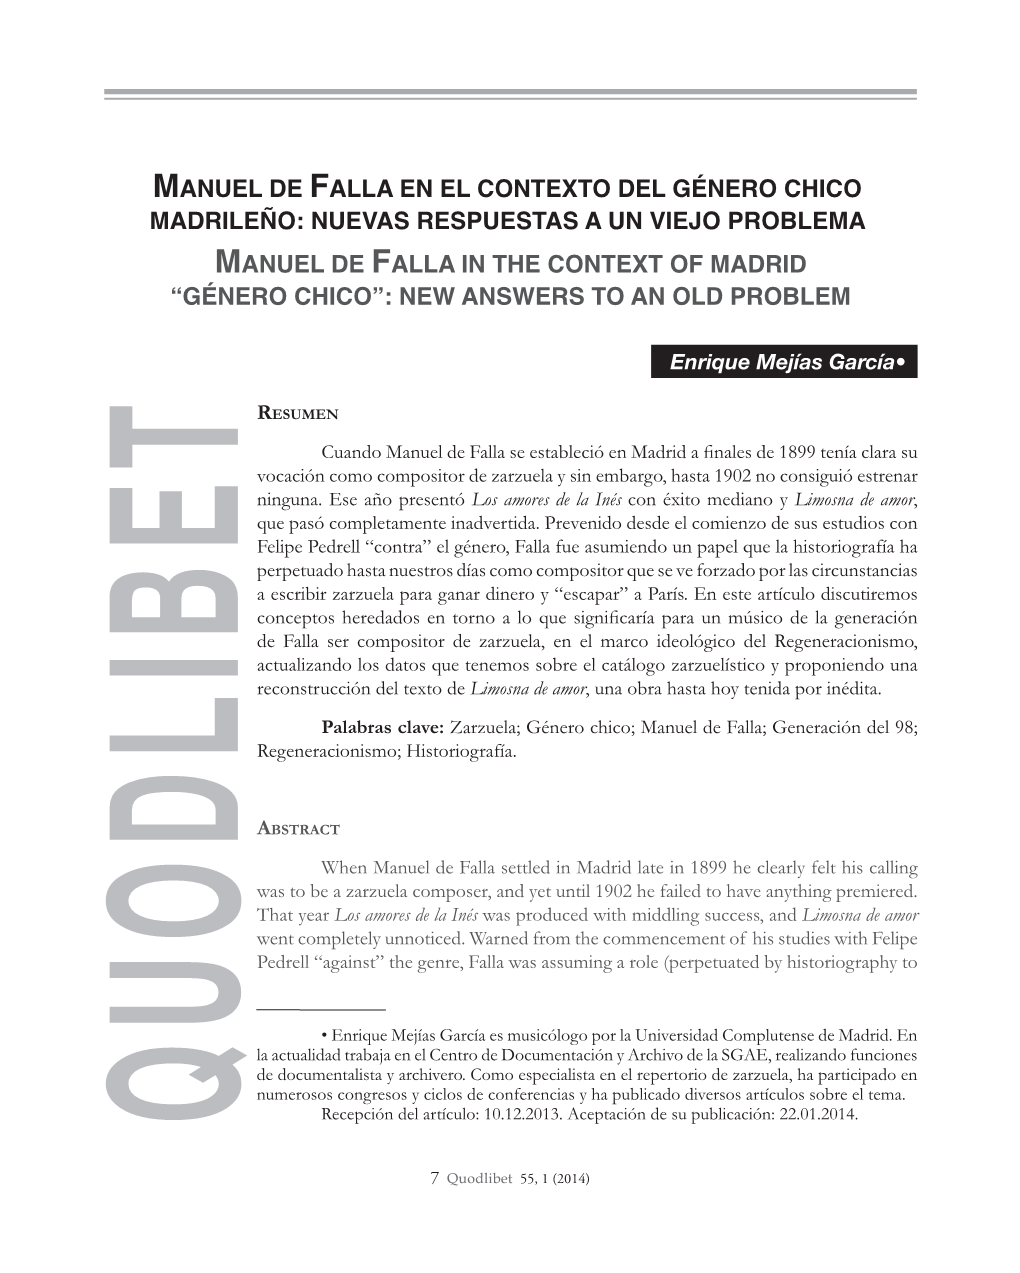 Manuel De Falla in the Context of Madrid “Género Chico”: New Answers to an Old Problem